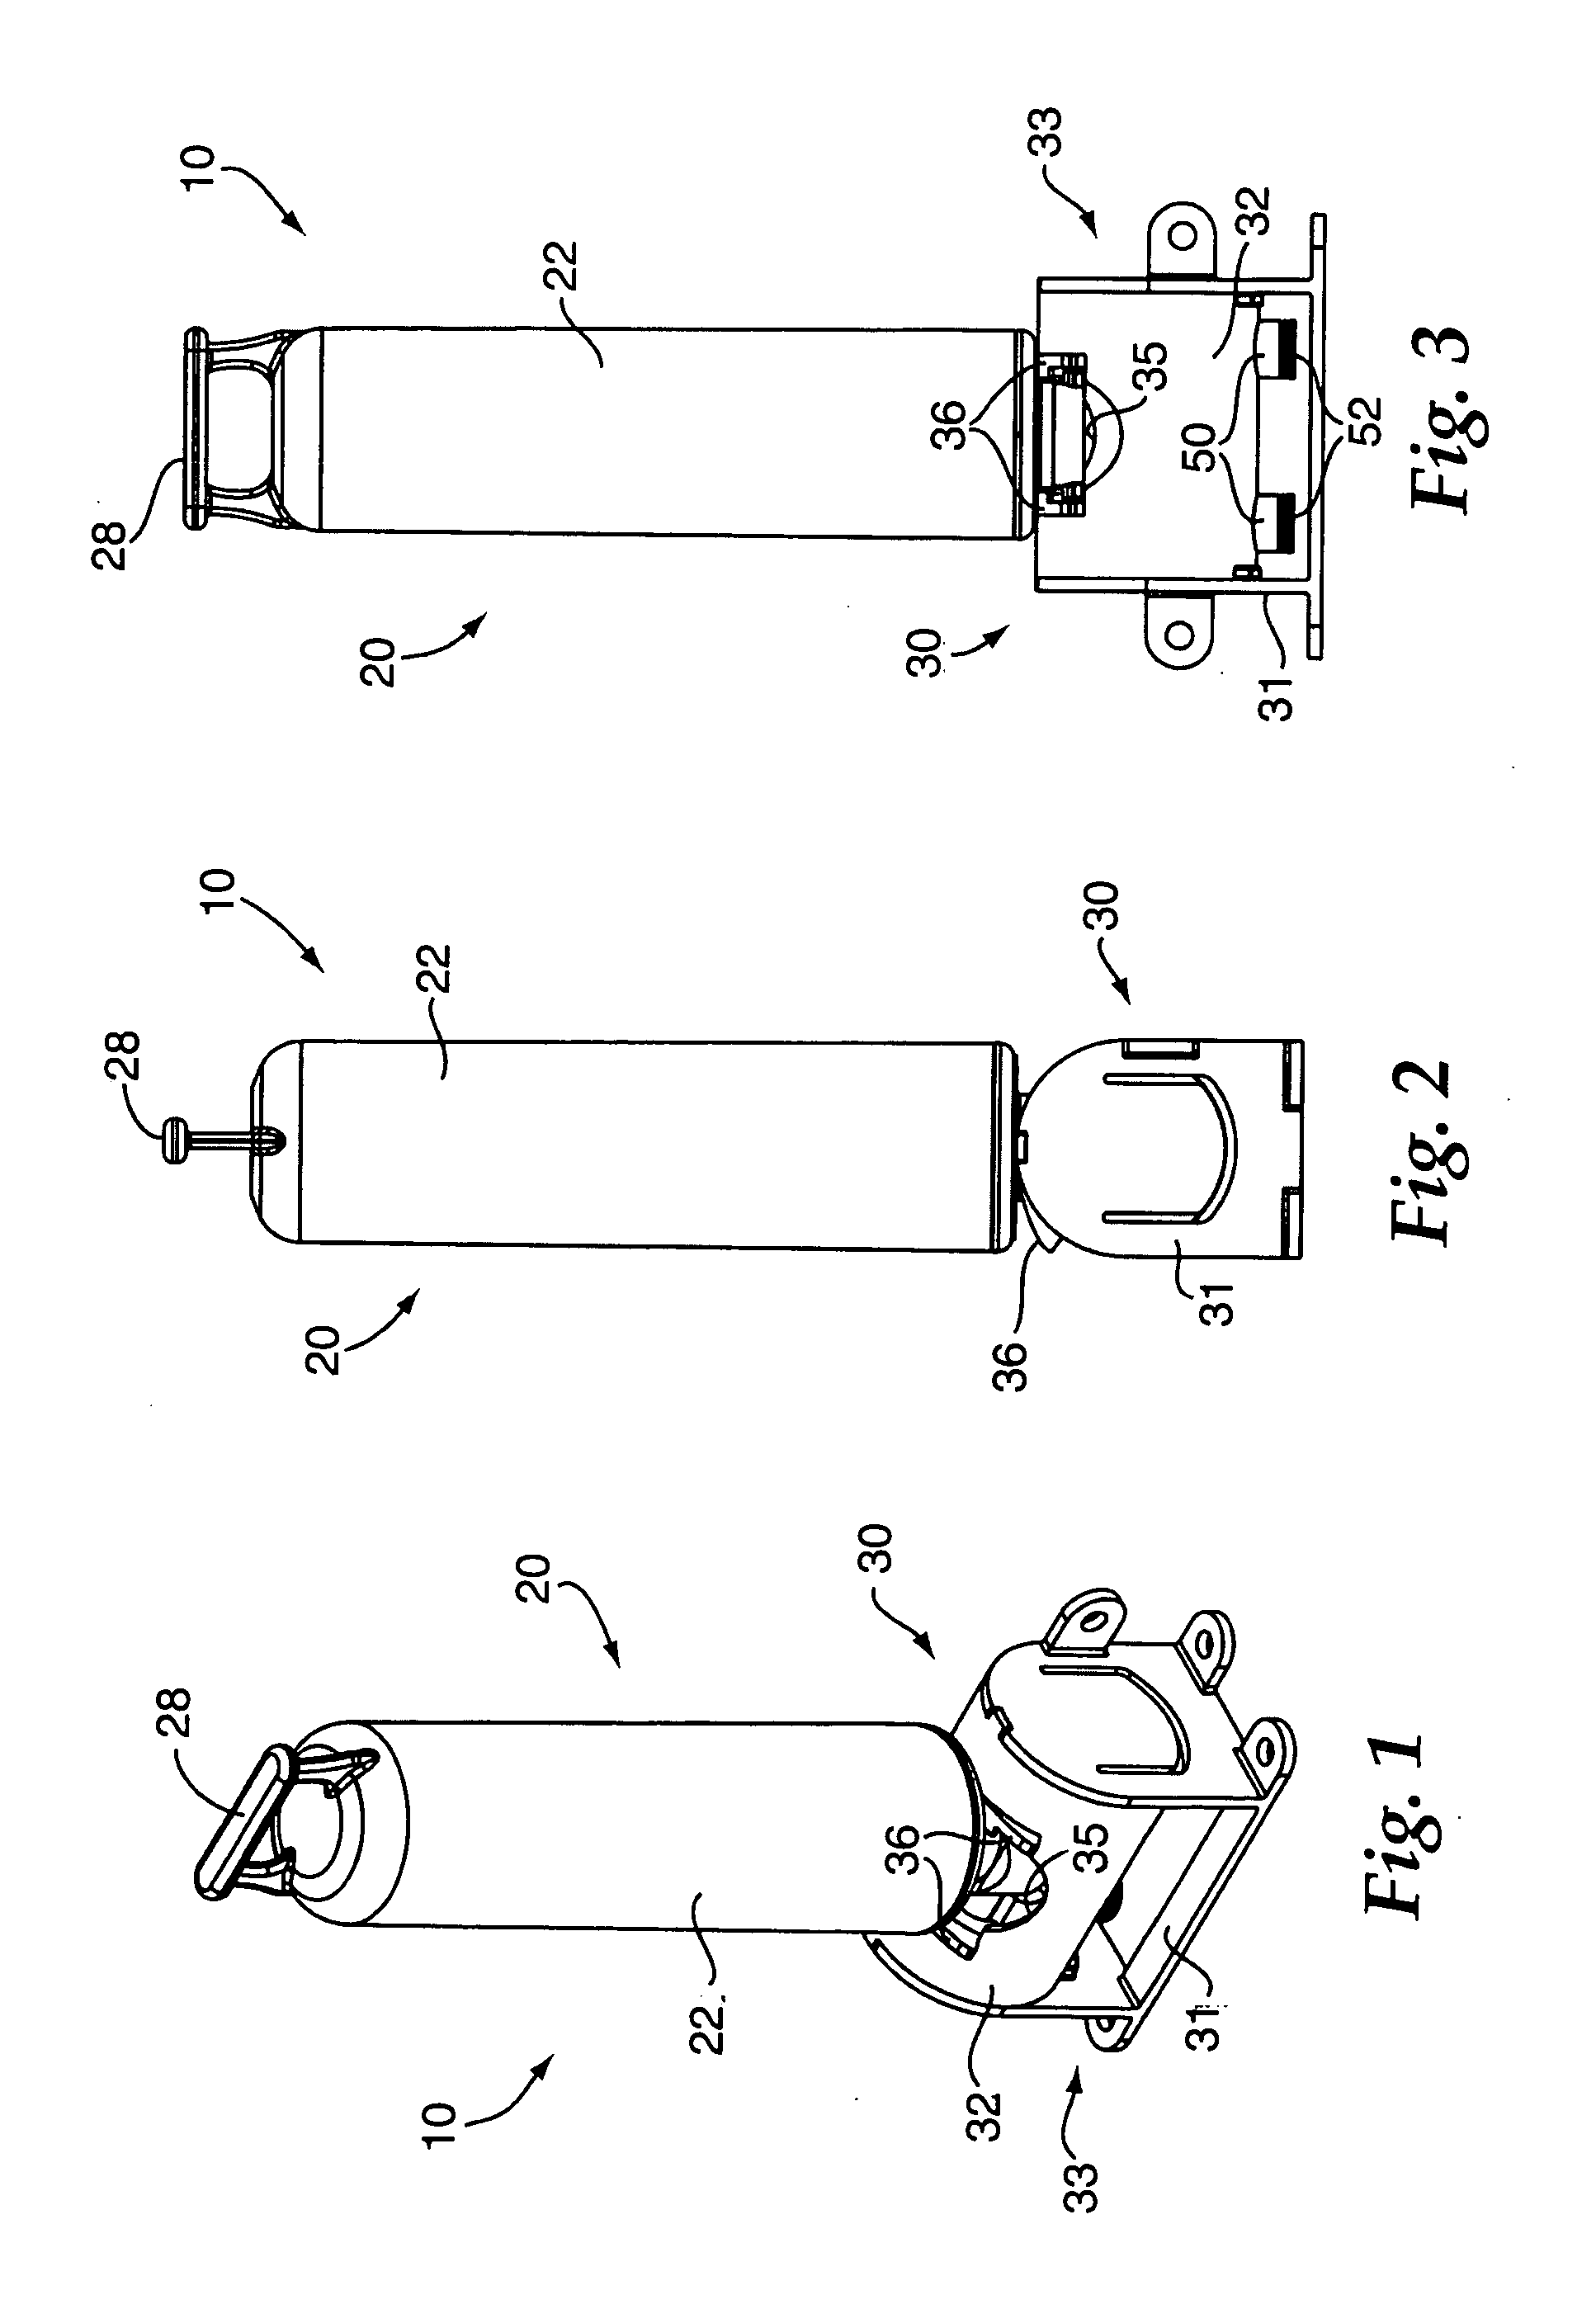 Spool valve manifold interconnect for a filter system